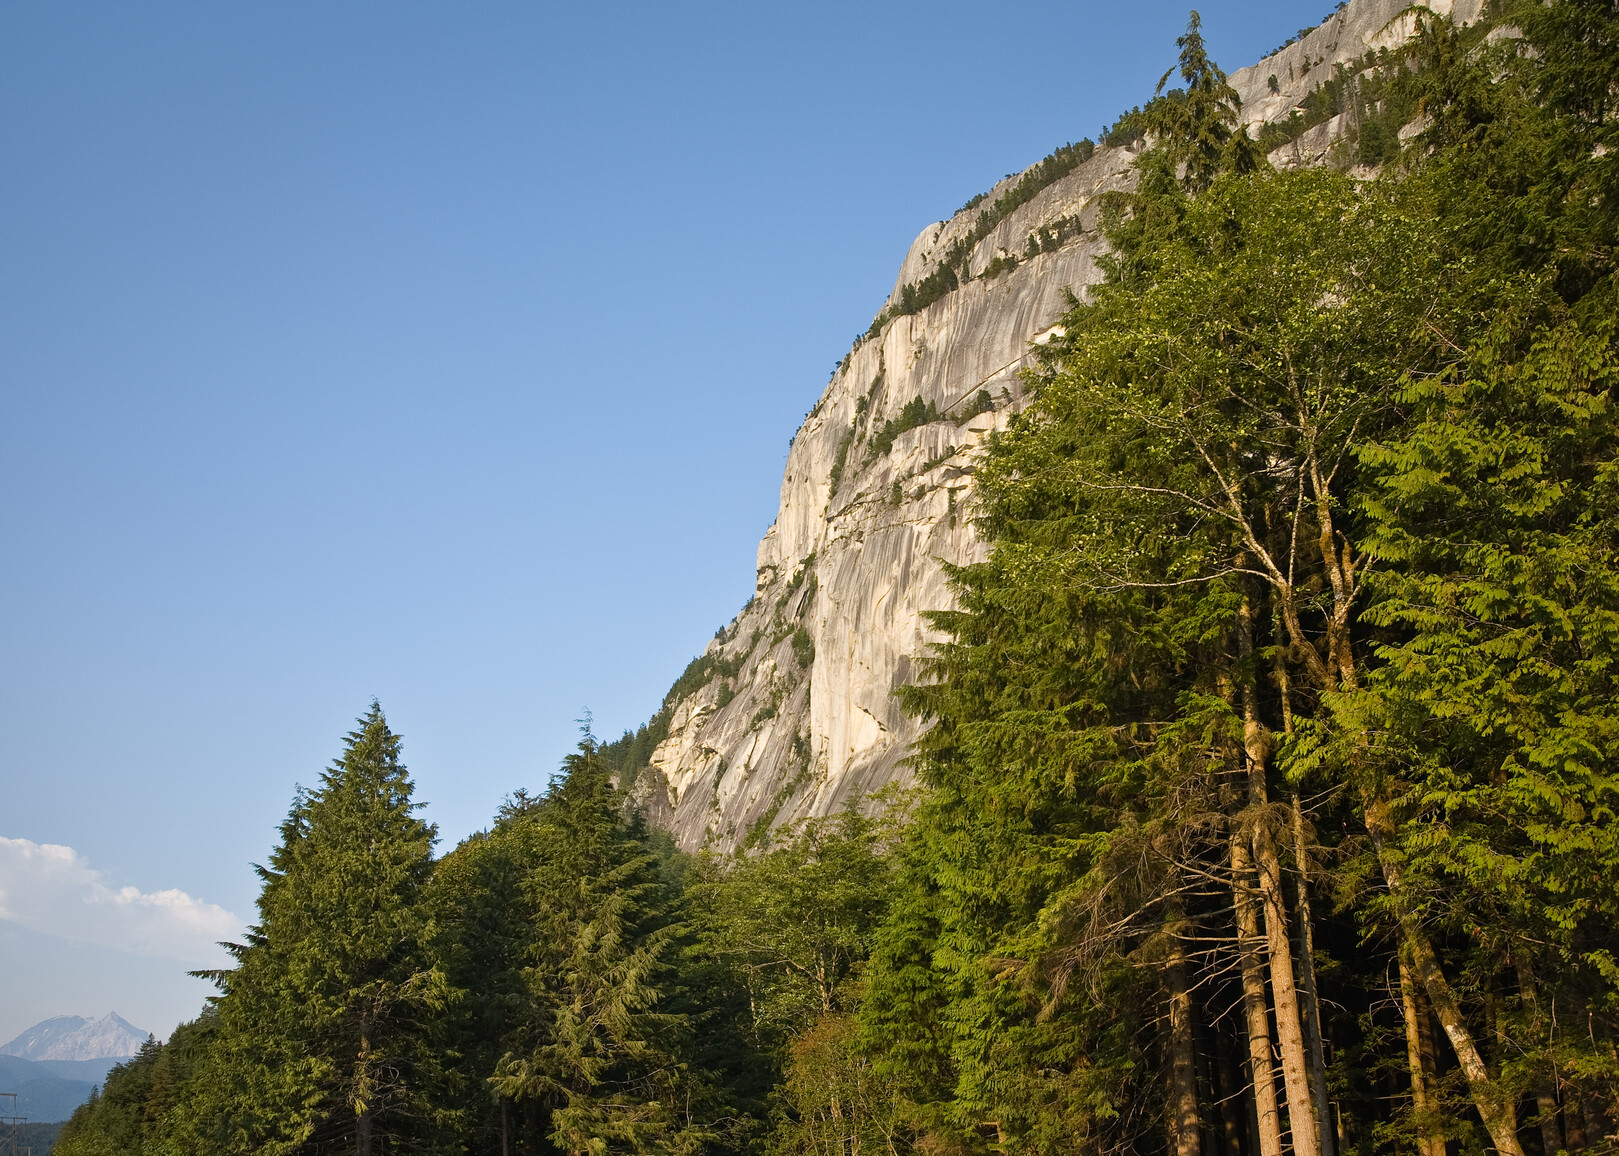 View of Stawamus Chief face. Forest at base of mountain.